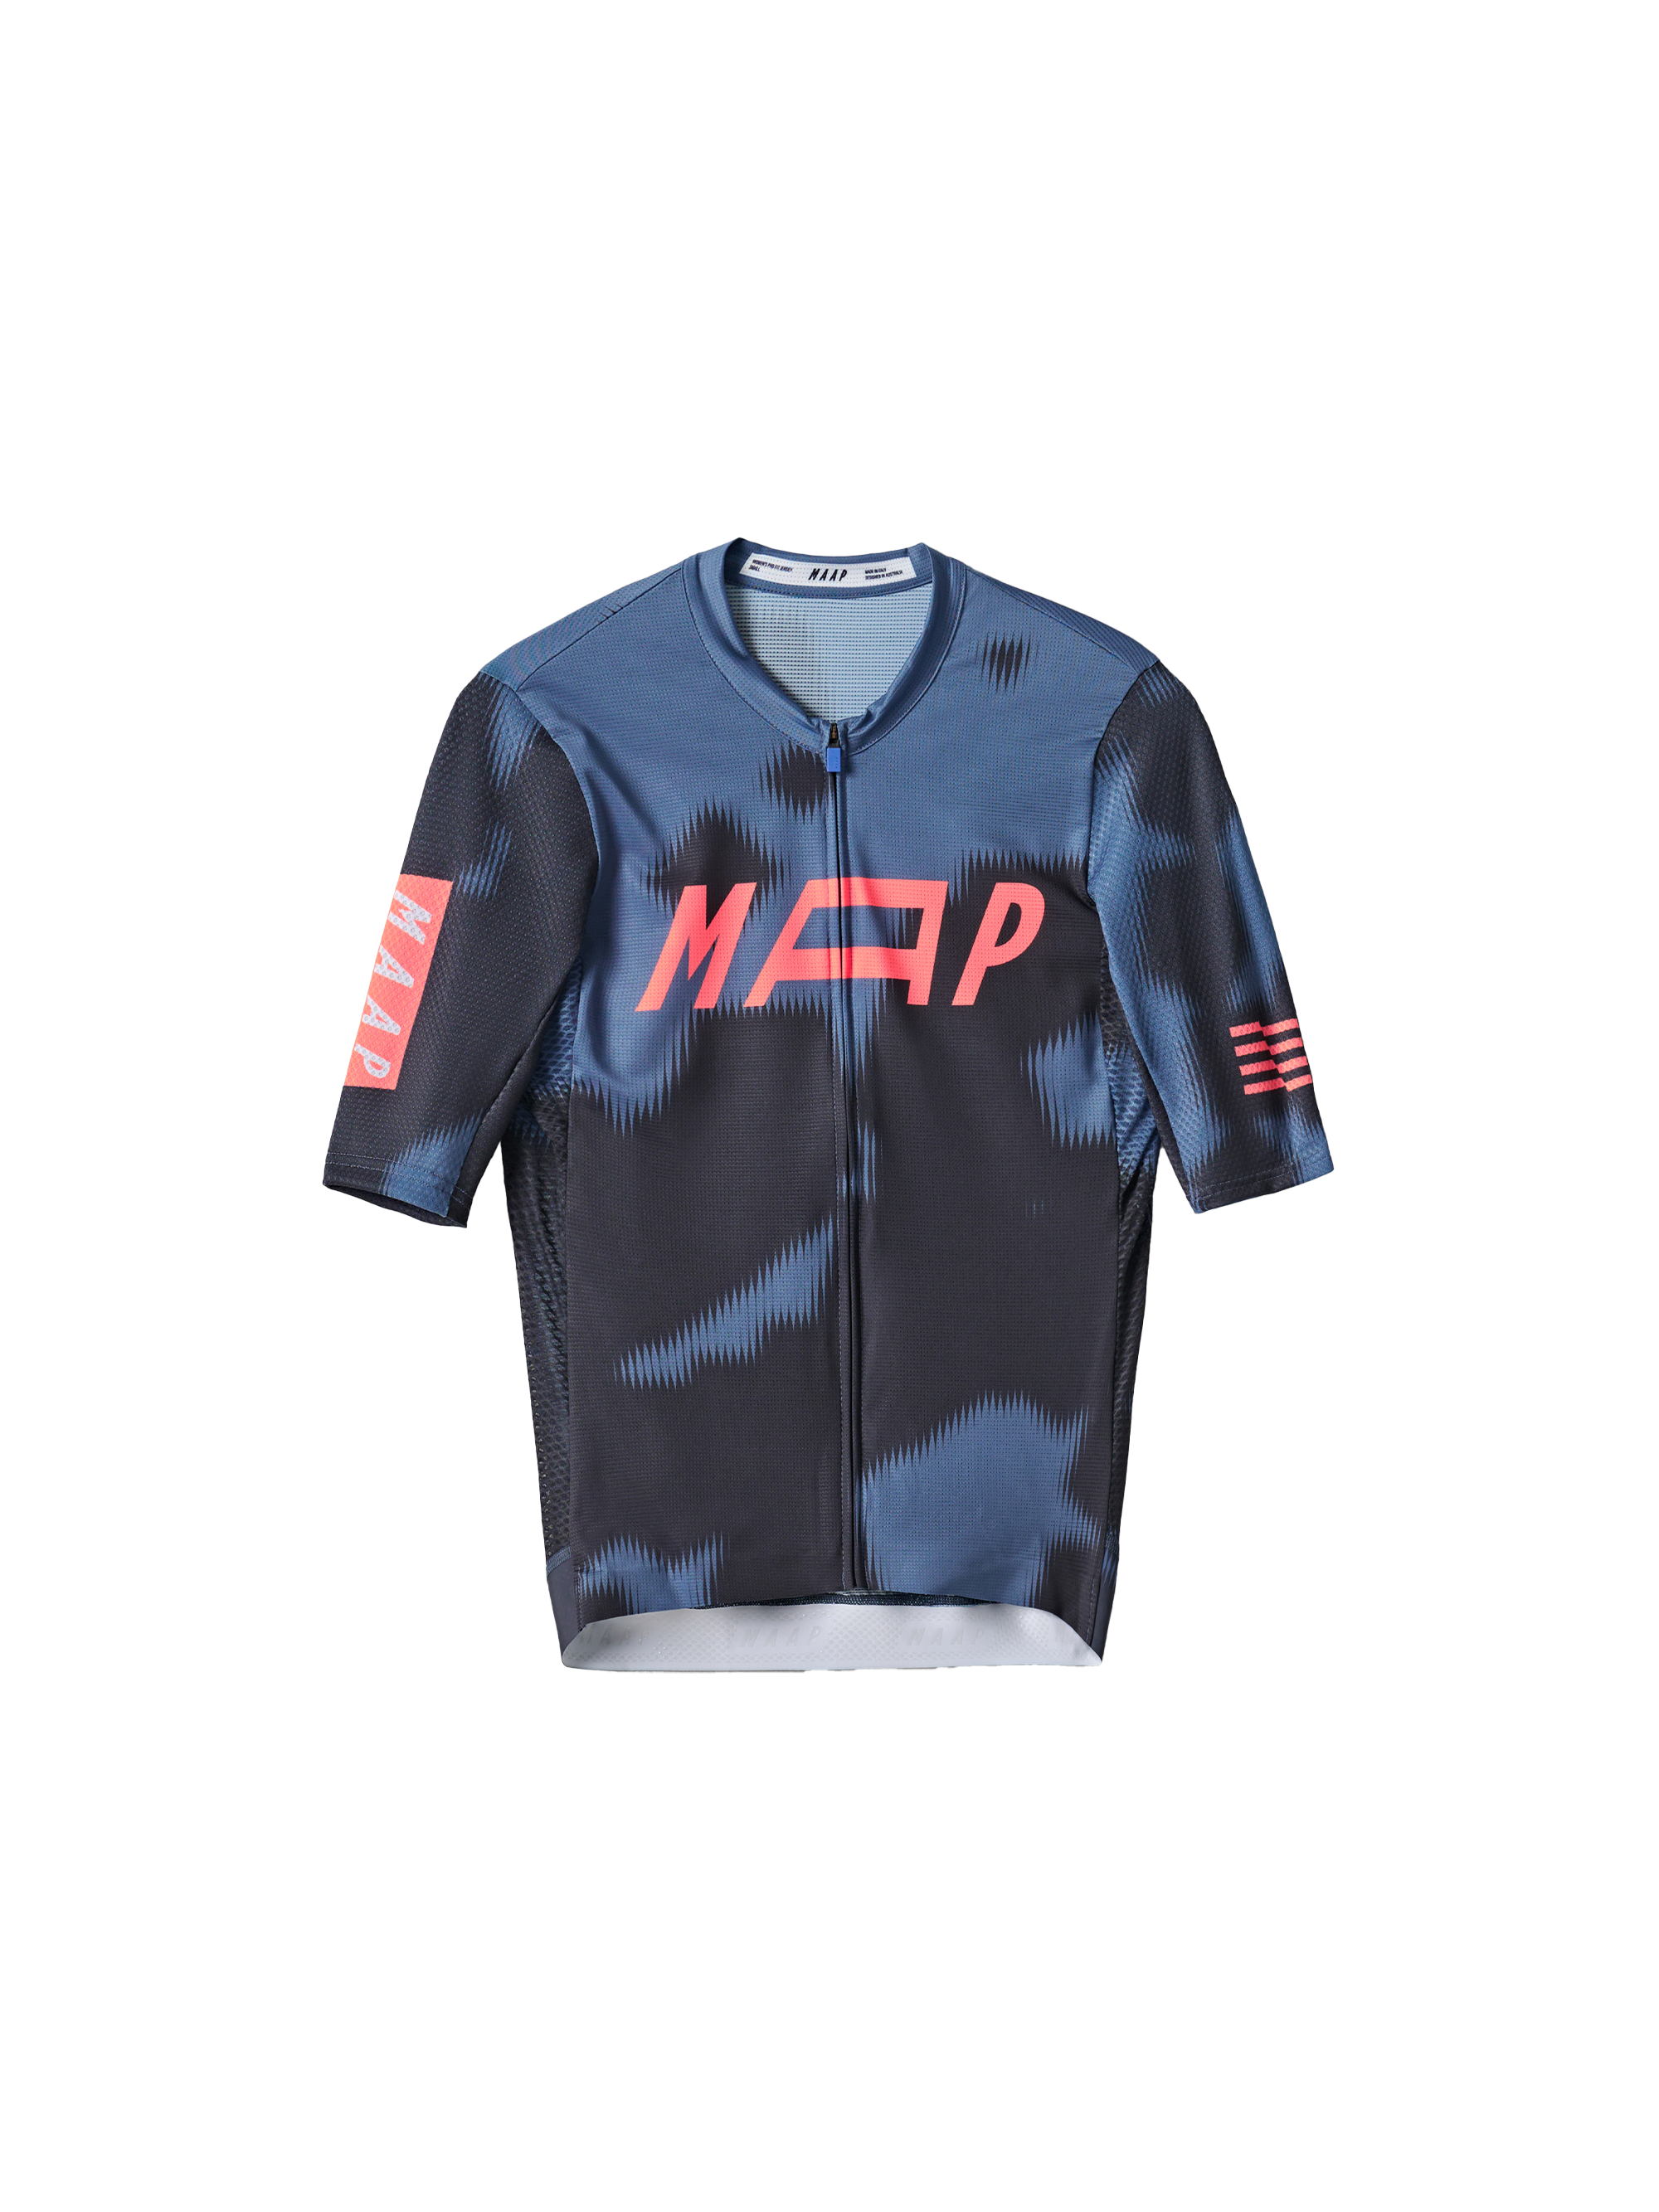 Women's Privateer H.S Pro Jersey